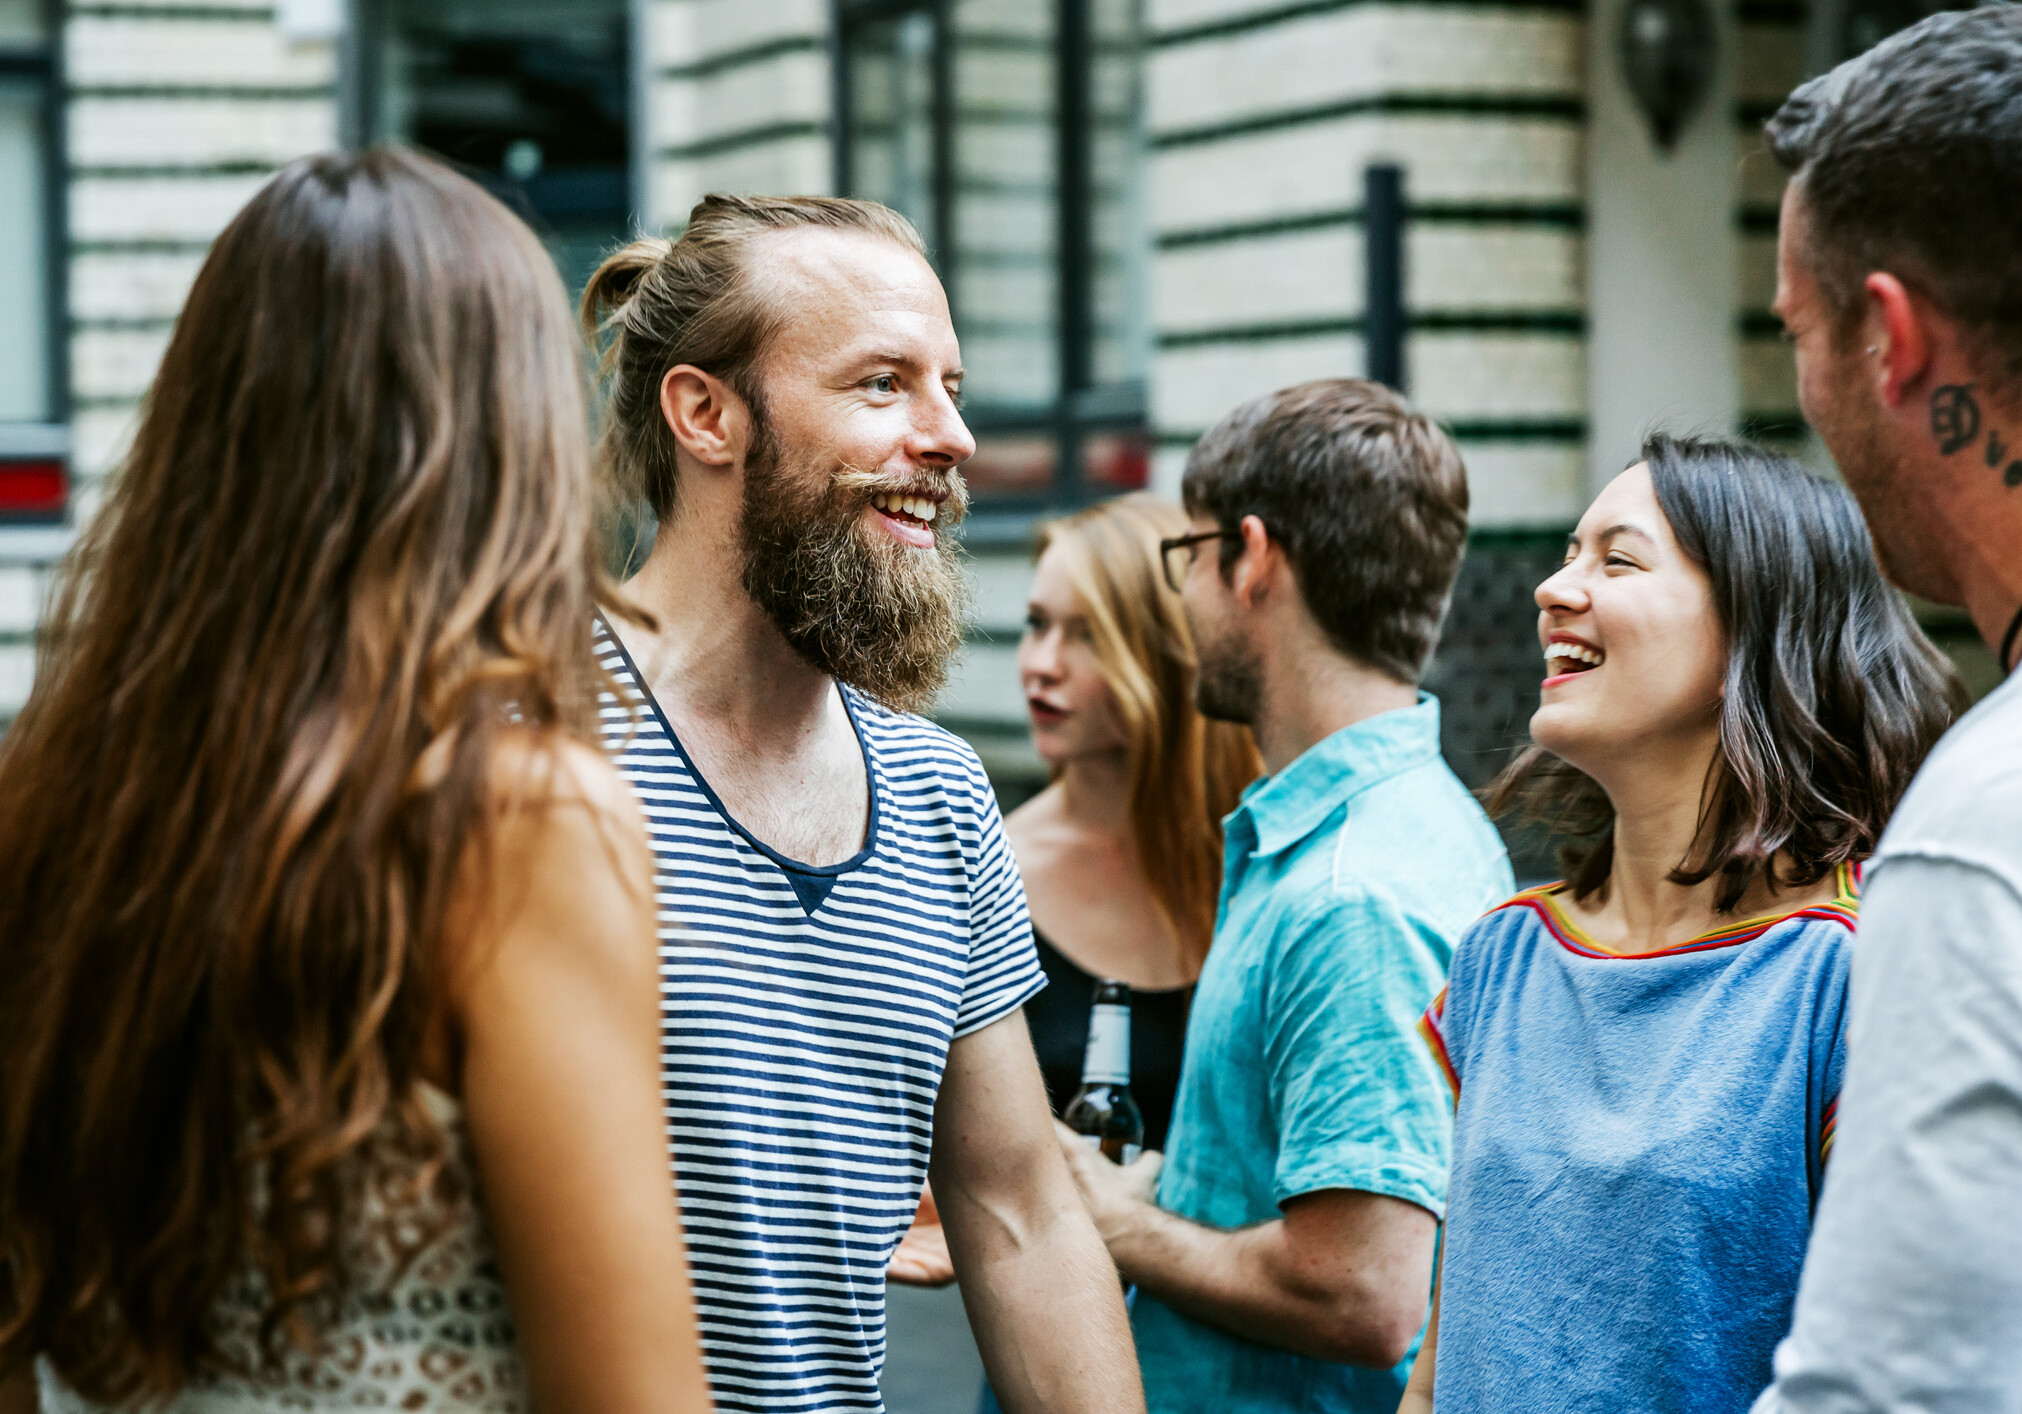 A young group of friends meeting together at a barbecue are chatting and smiling as they greet each other.